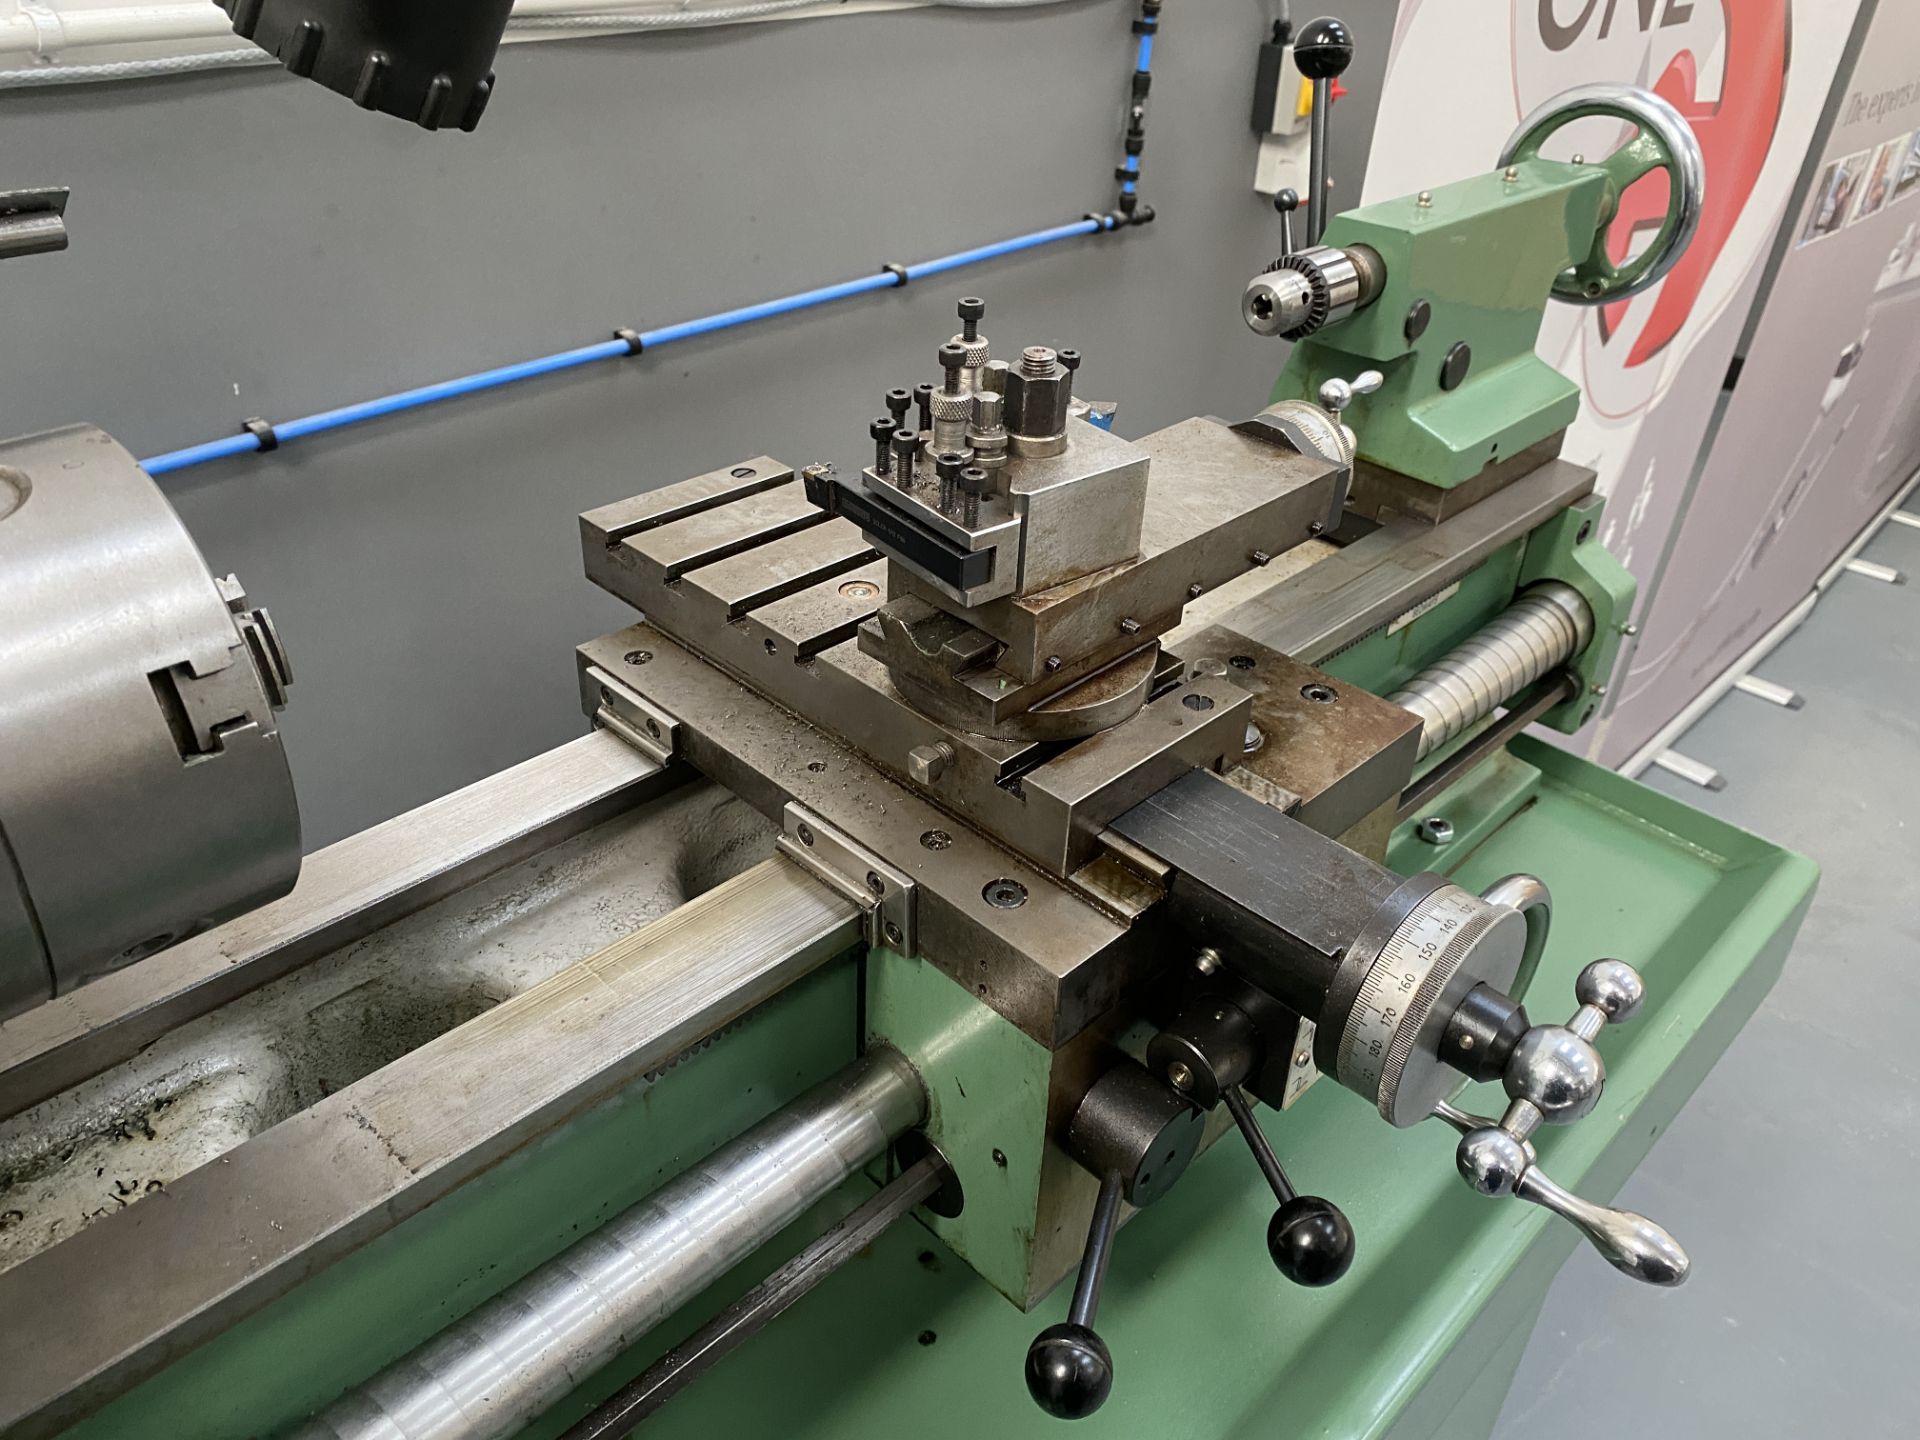 Myford 254s Hobby Lathe, Serial No. ZS164056 EIC with Powercross & Longitudinal Feeds with Tooling - Image 6 of 15